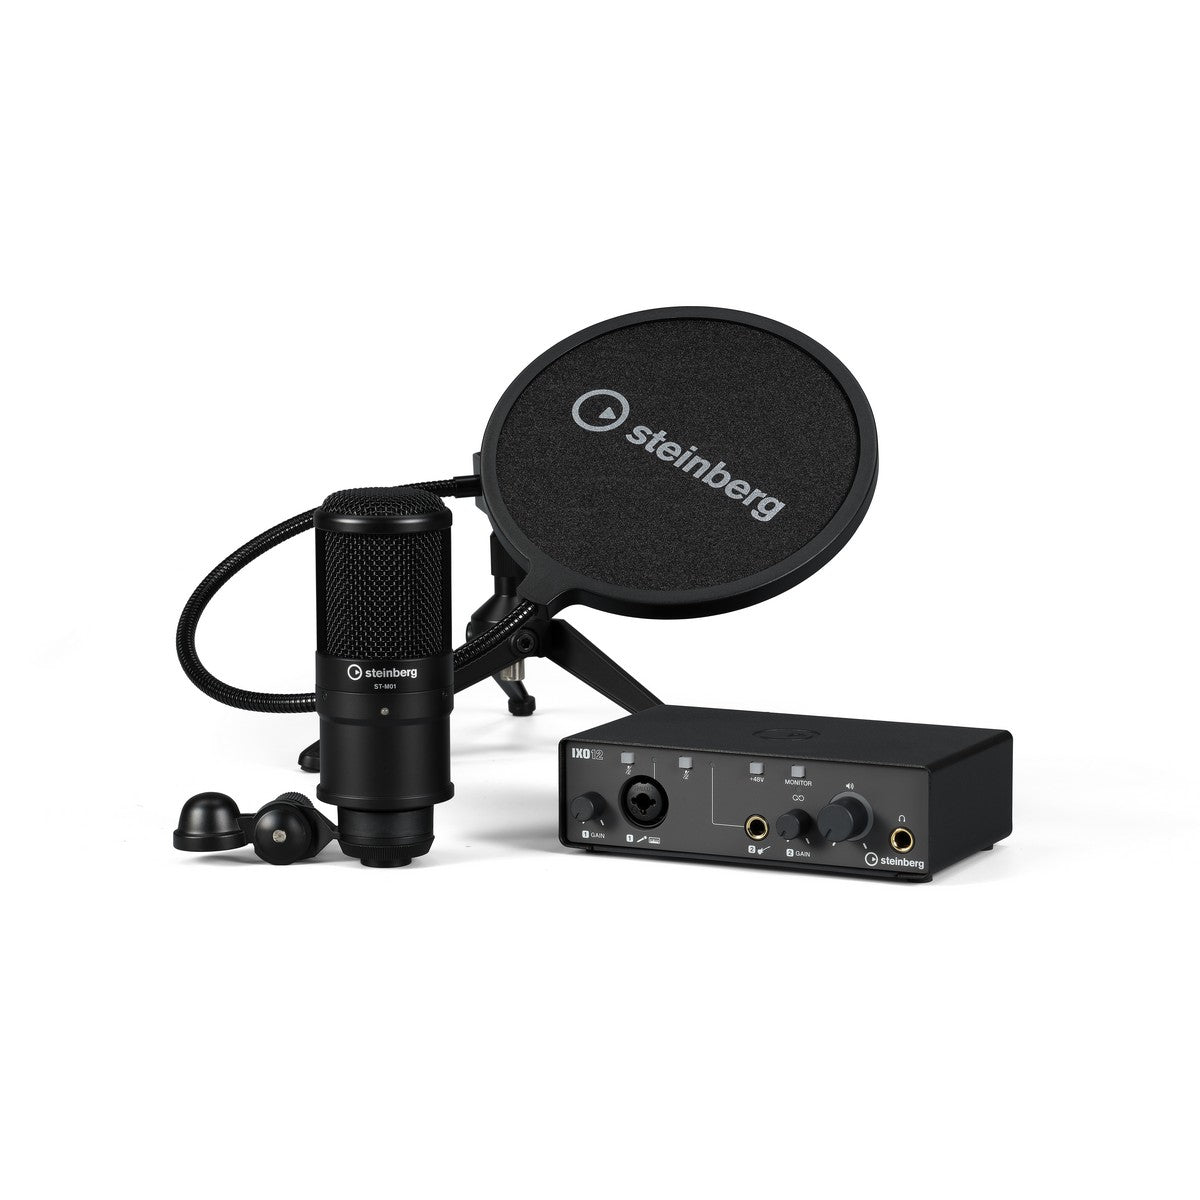 Steinberg IXO Podcast Pack with IXO12 and ST-M01, Black